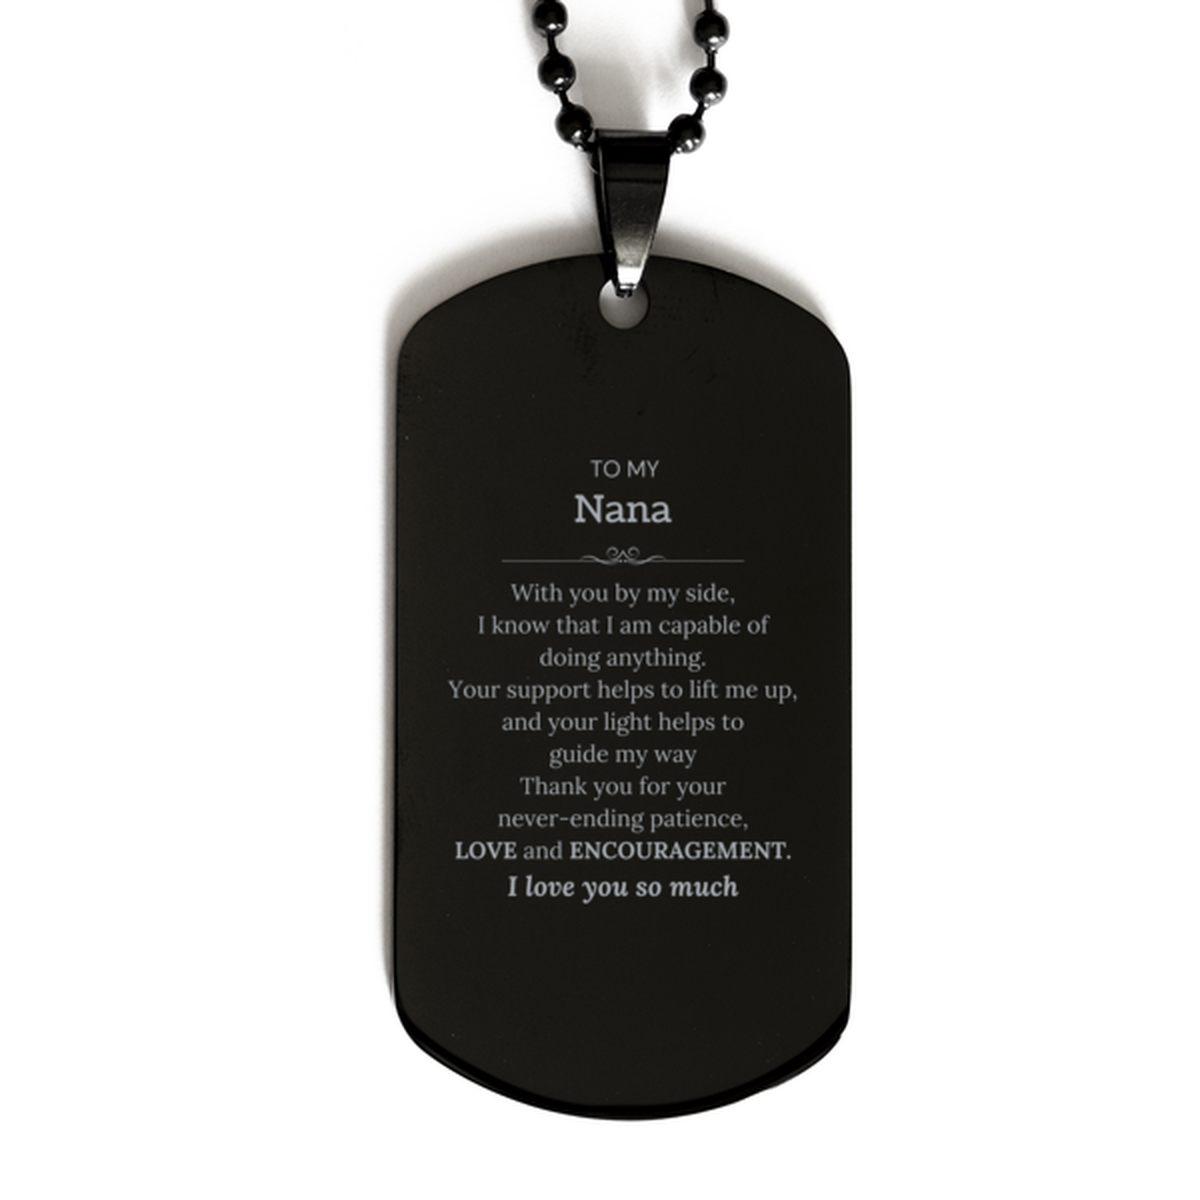 Appreciation Nana Black Dog Tag Gifts, To My Nana Birthday Christmas Wedding Keepsake Gifts for Nana With you by my side, I know that I am capable of doing anything. I love you so much